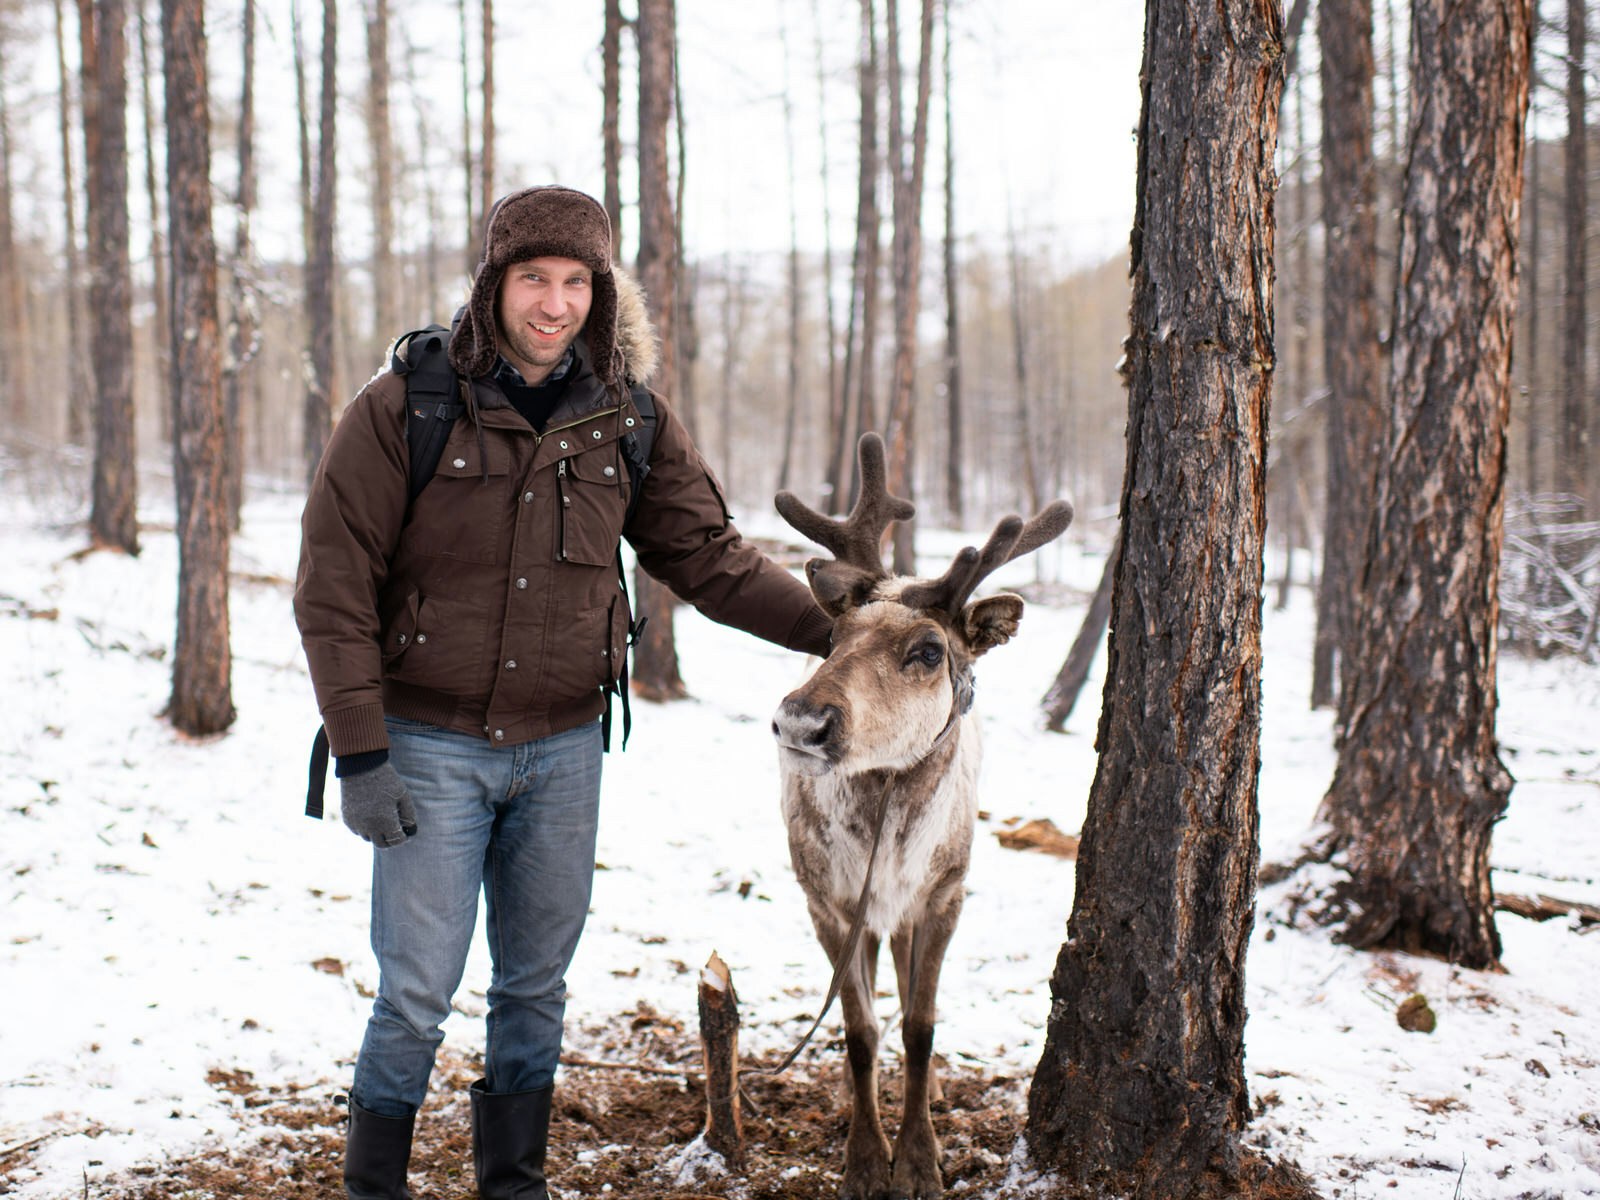 Chris Sheldrick wearing a fur hat and winter coat pets a reindeer in a snowy forest. Despite a packing faux pas, Chris was able to make friends in northern Mongolia © Chris Sheldrick